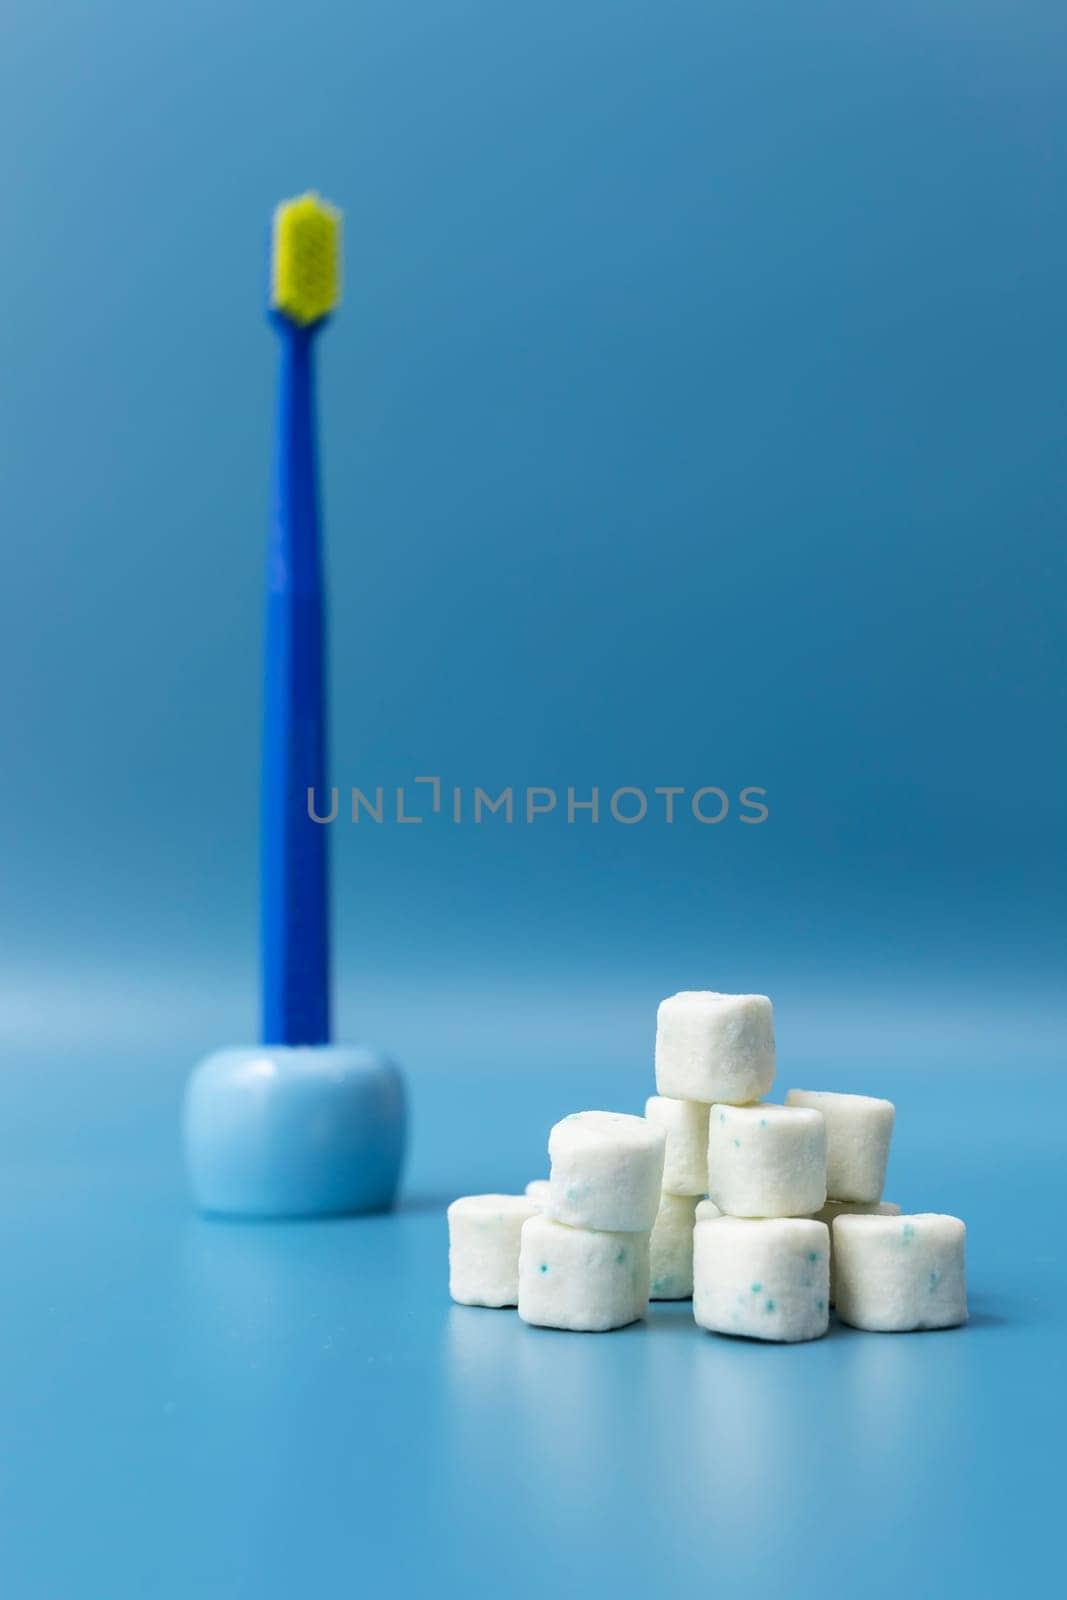 Heap Of Healthy Sugar-Free Xylitol Cubes Of White Chewing Gum, Toothbrush on Blue Background. Healthy Teeth, Beautiful Smile Concept. Top View, Copy Space. Bubble Gum, Oral Hygiene. Vertical Plane